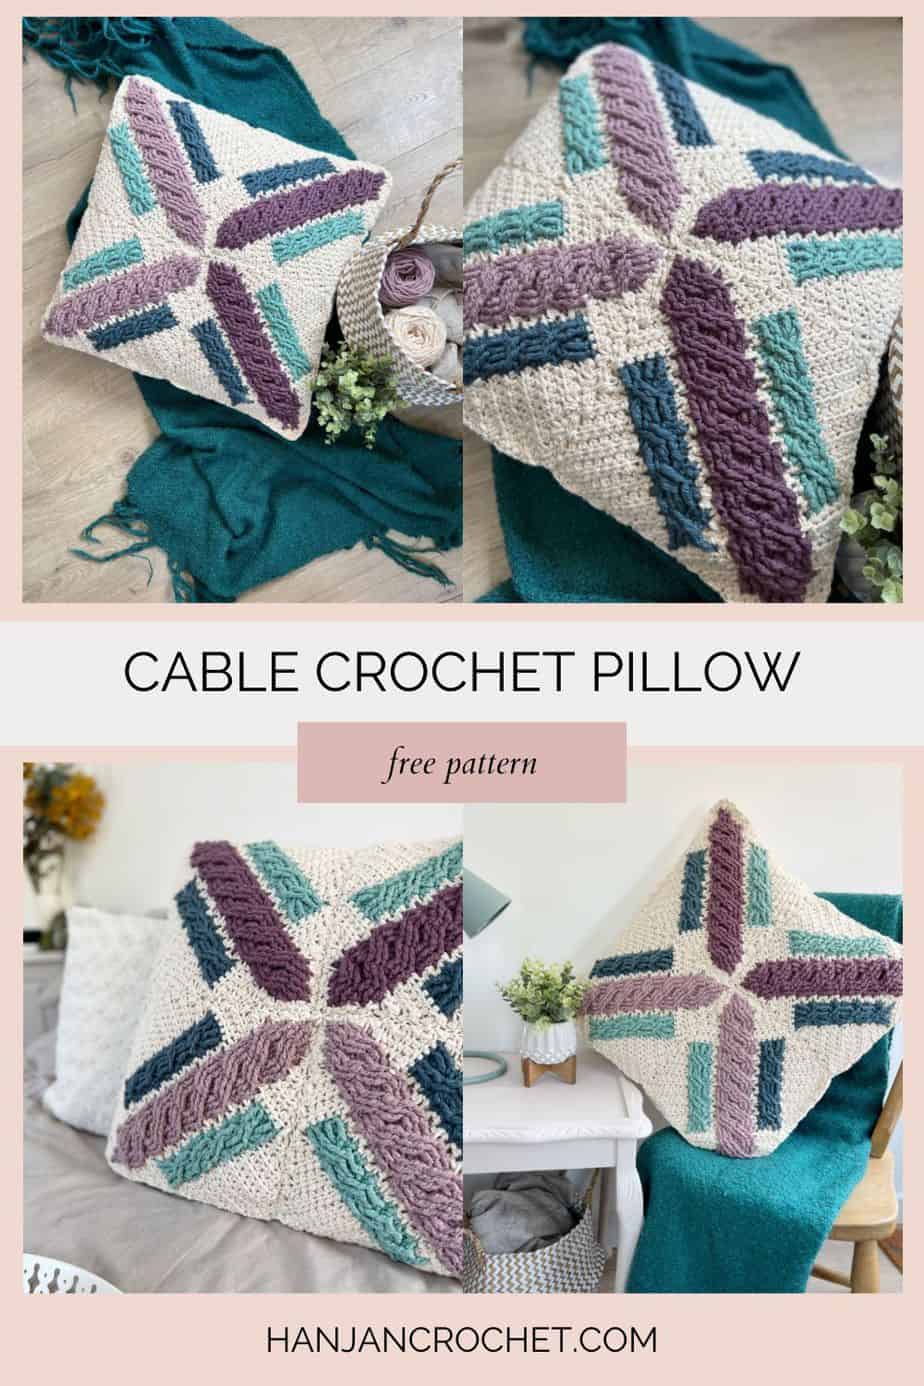 four images showing colourful crochet pillow pattern with advanced cable technique